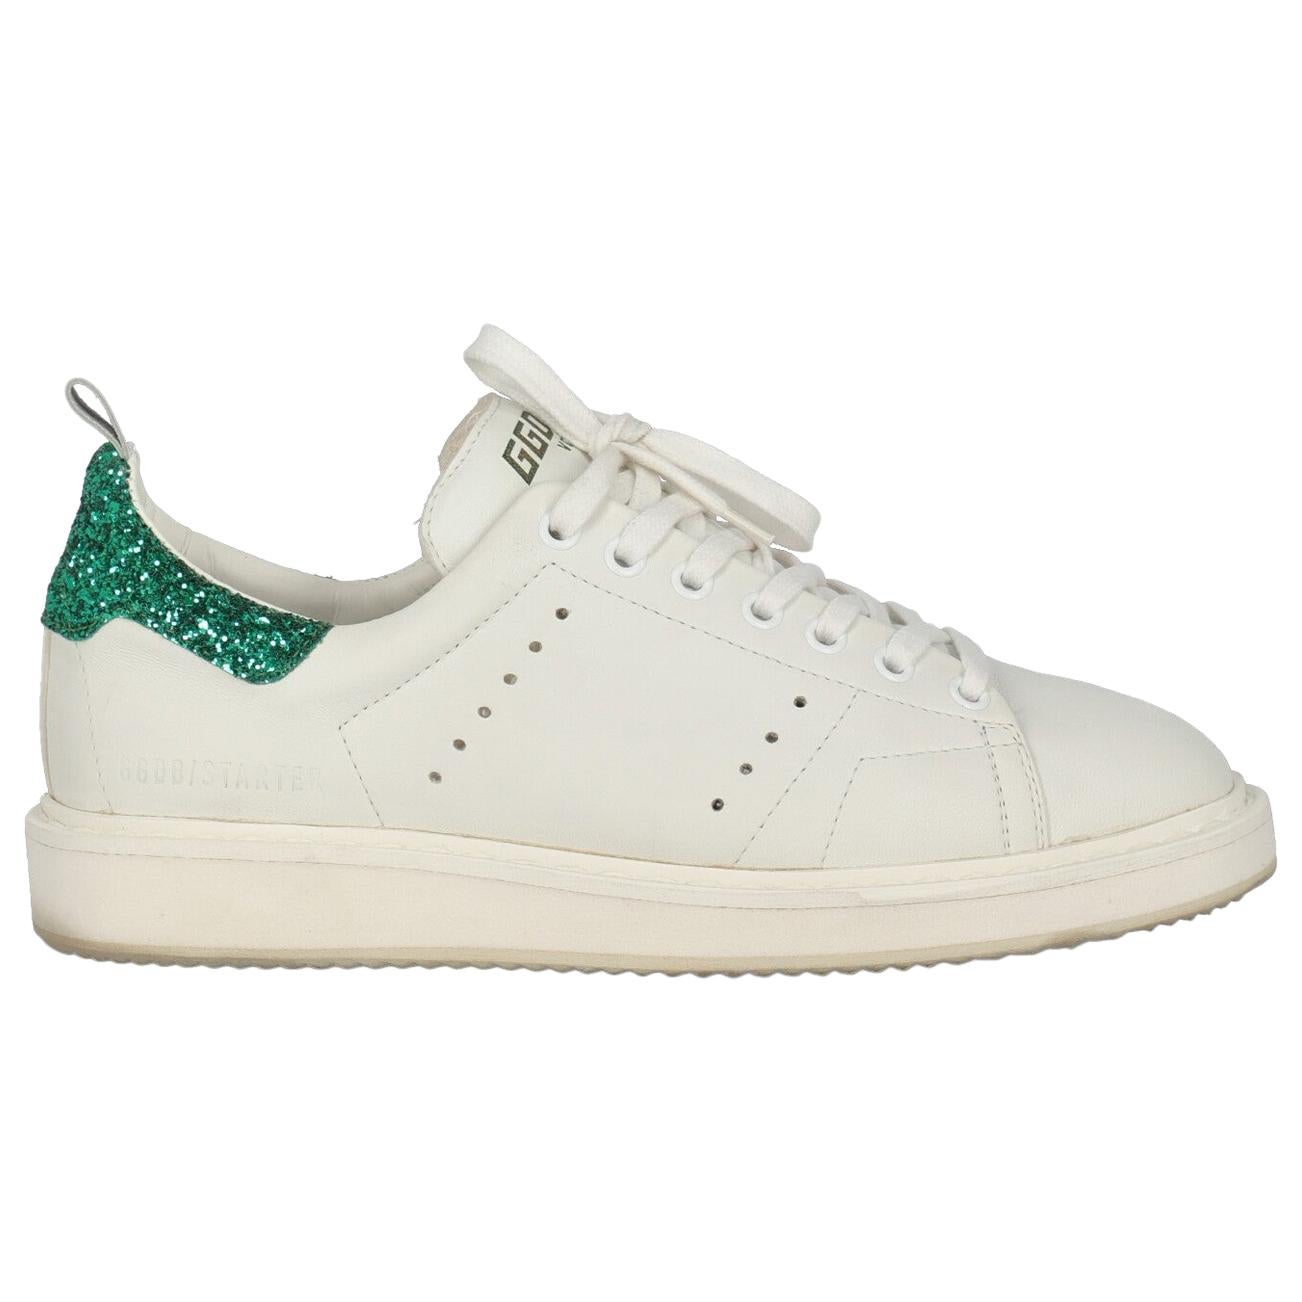 Golden Goose Deluxe Brand Woman Sneakers Green Leather IT 38